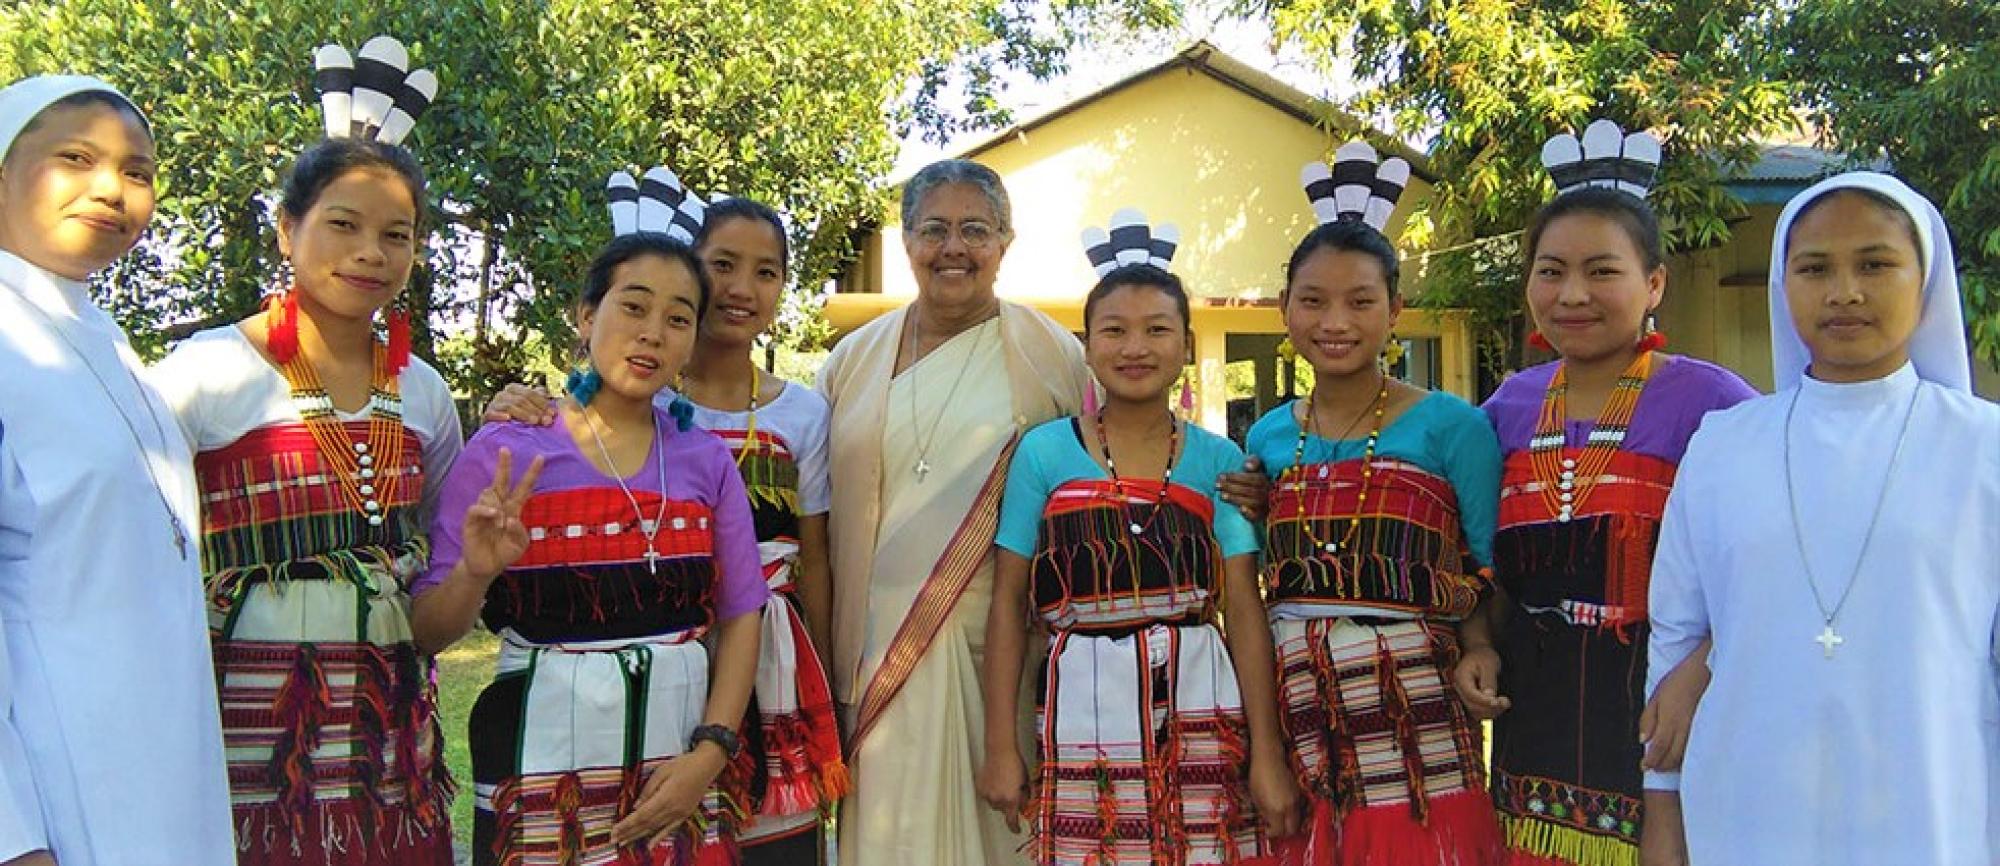 Side by side with indigenous peoples in North East India